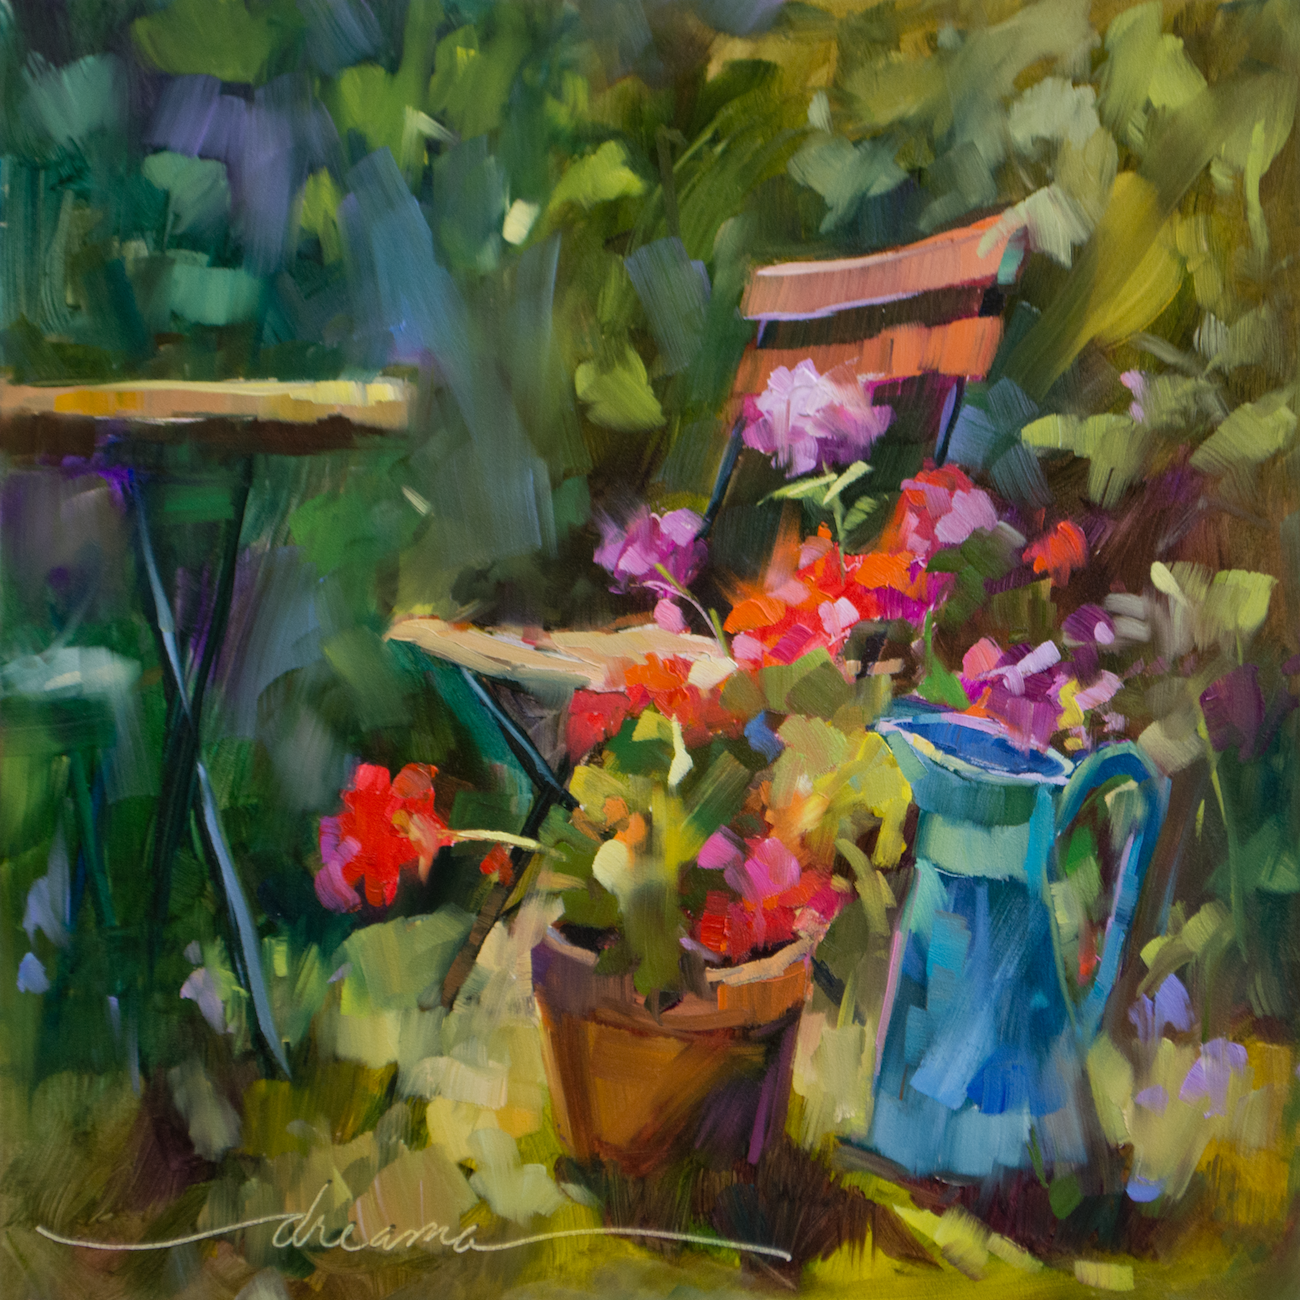 "You Must Come to My Garden" Colorful and Original Oils of All Things French by Artist Dreama Tolle Perry